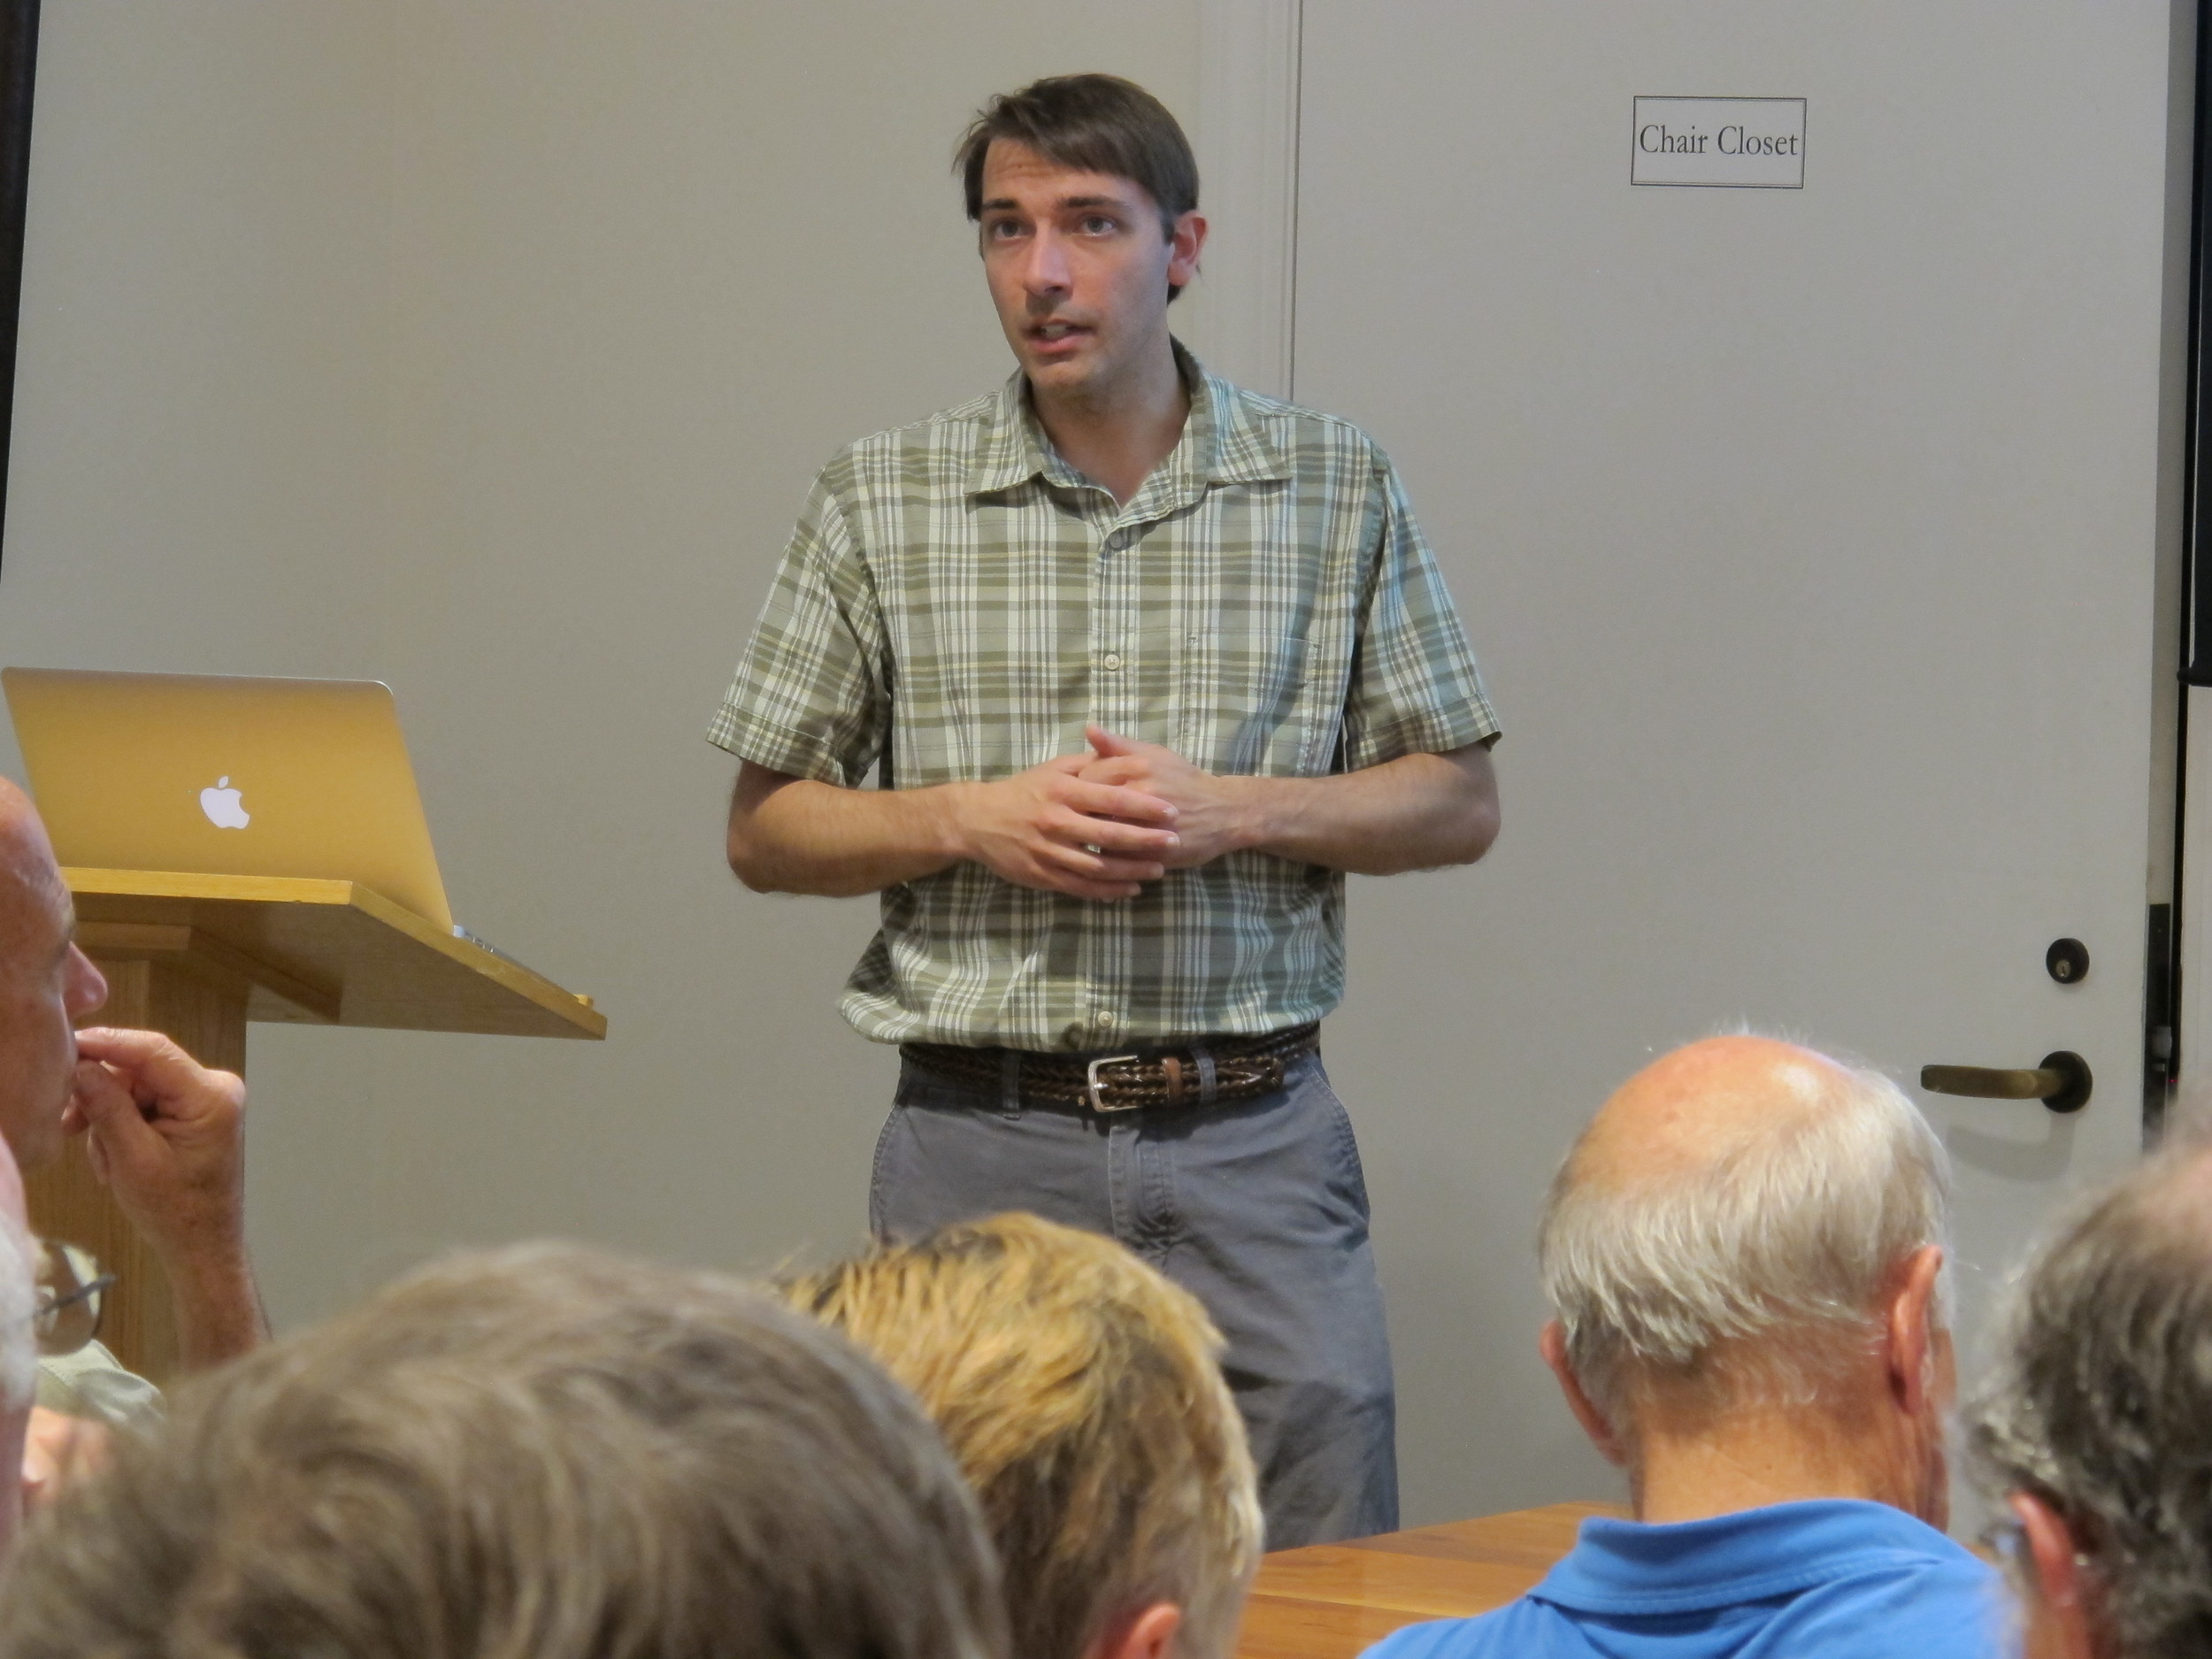 Sean Birkel, a Maine state climatologist and University of Maine research assistant professor